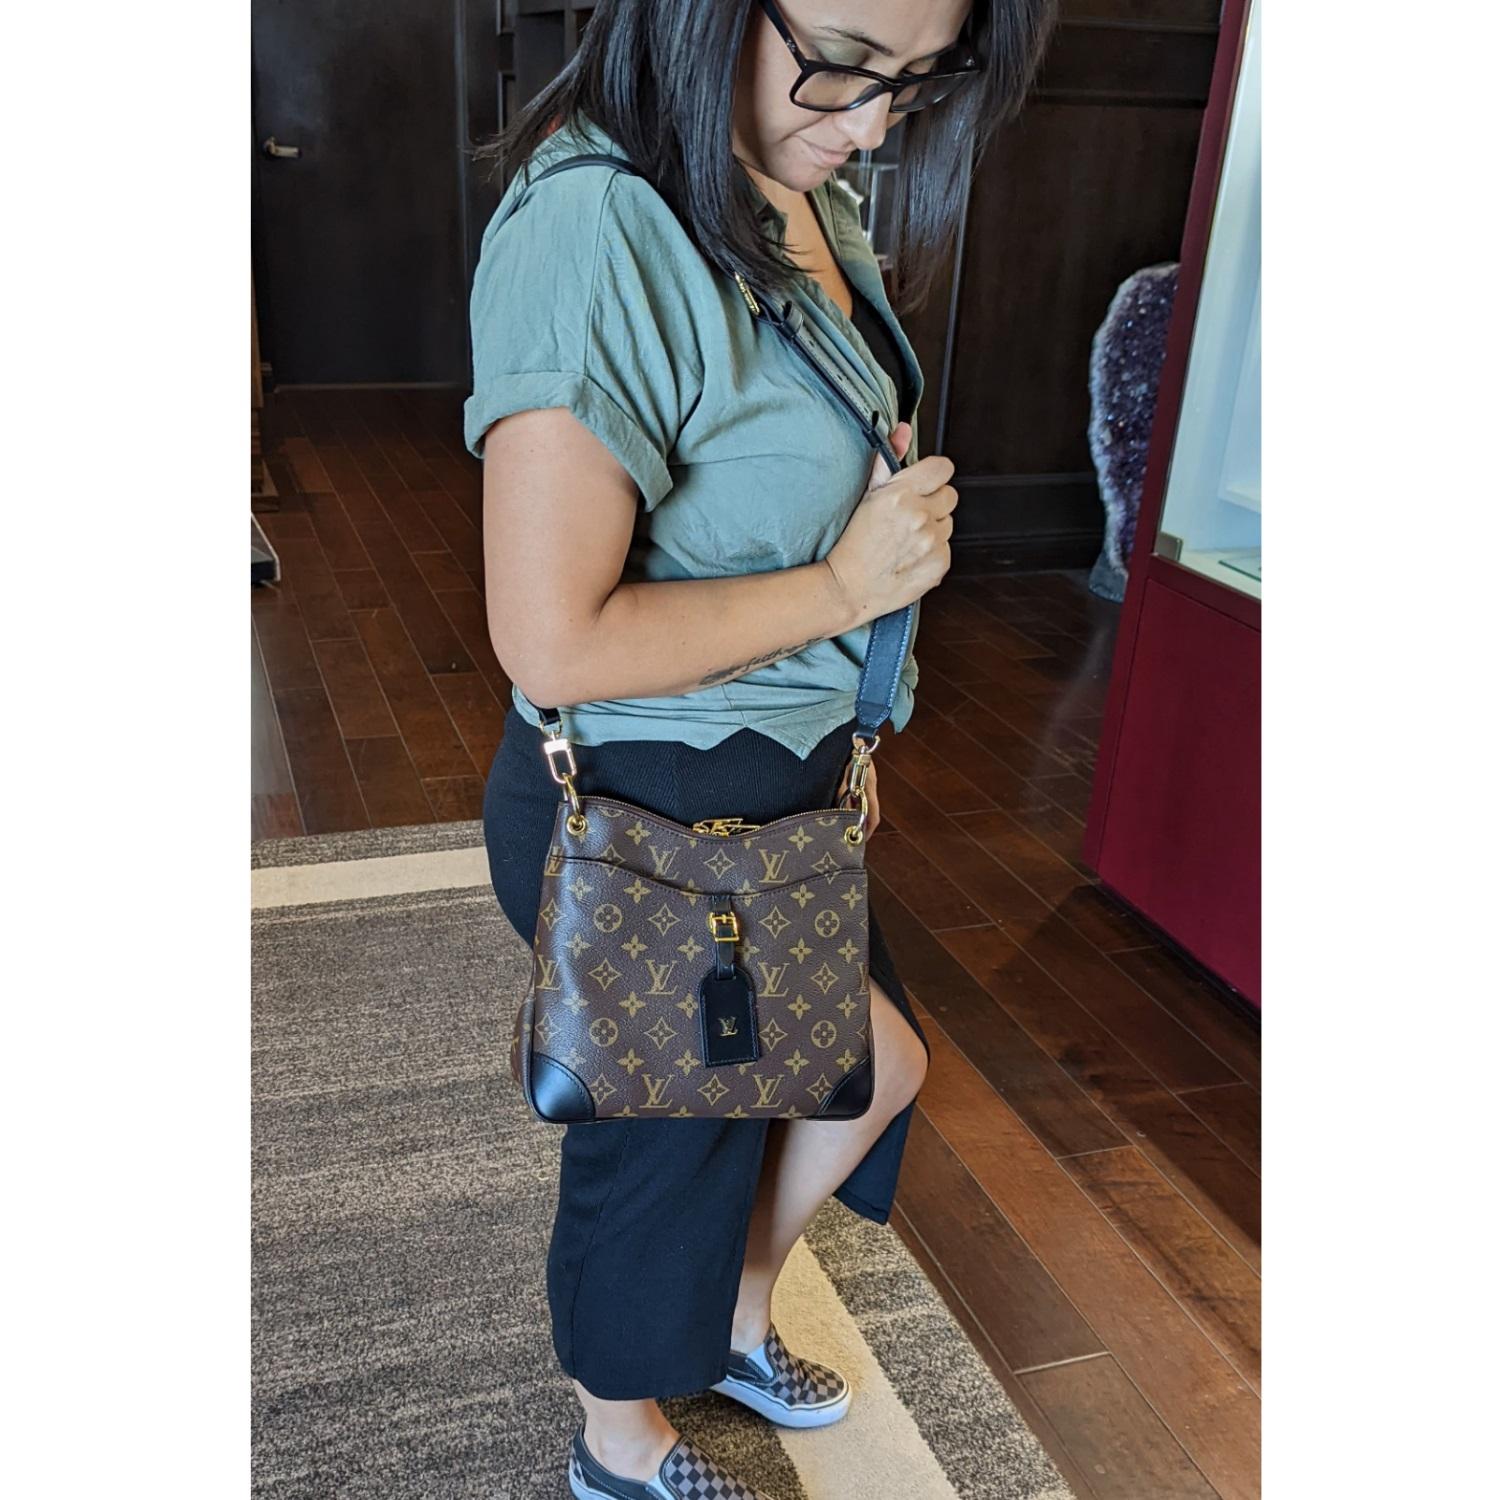 This messenger bag is crafted of signature Louis Vuitton monogram coated canvas, with black leather trim. The bag features an adjustable shoulder strap with gold-tone hardware and a flat front pocket for extra storage. The top zipper opens to a